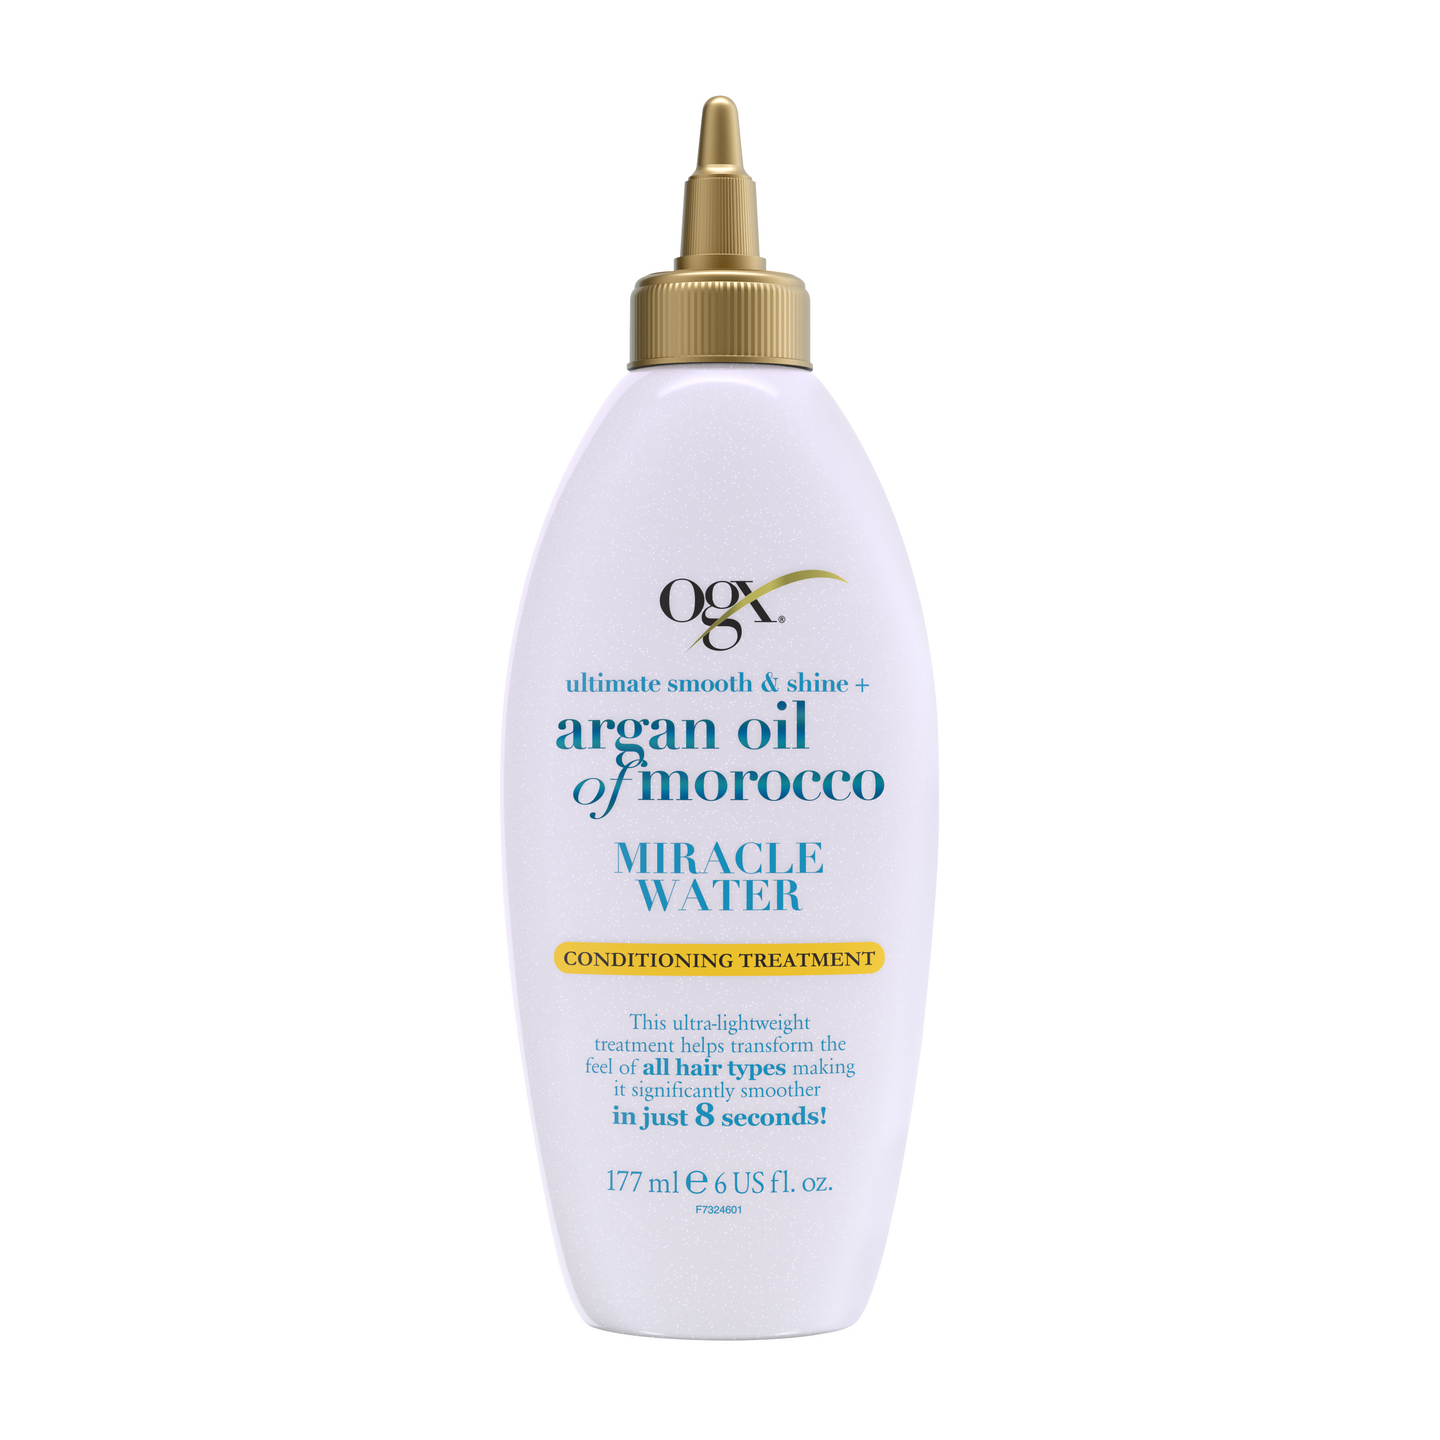 OGX Argan Oil of Morocco Miracle Water 177ml Conditioning Treatment